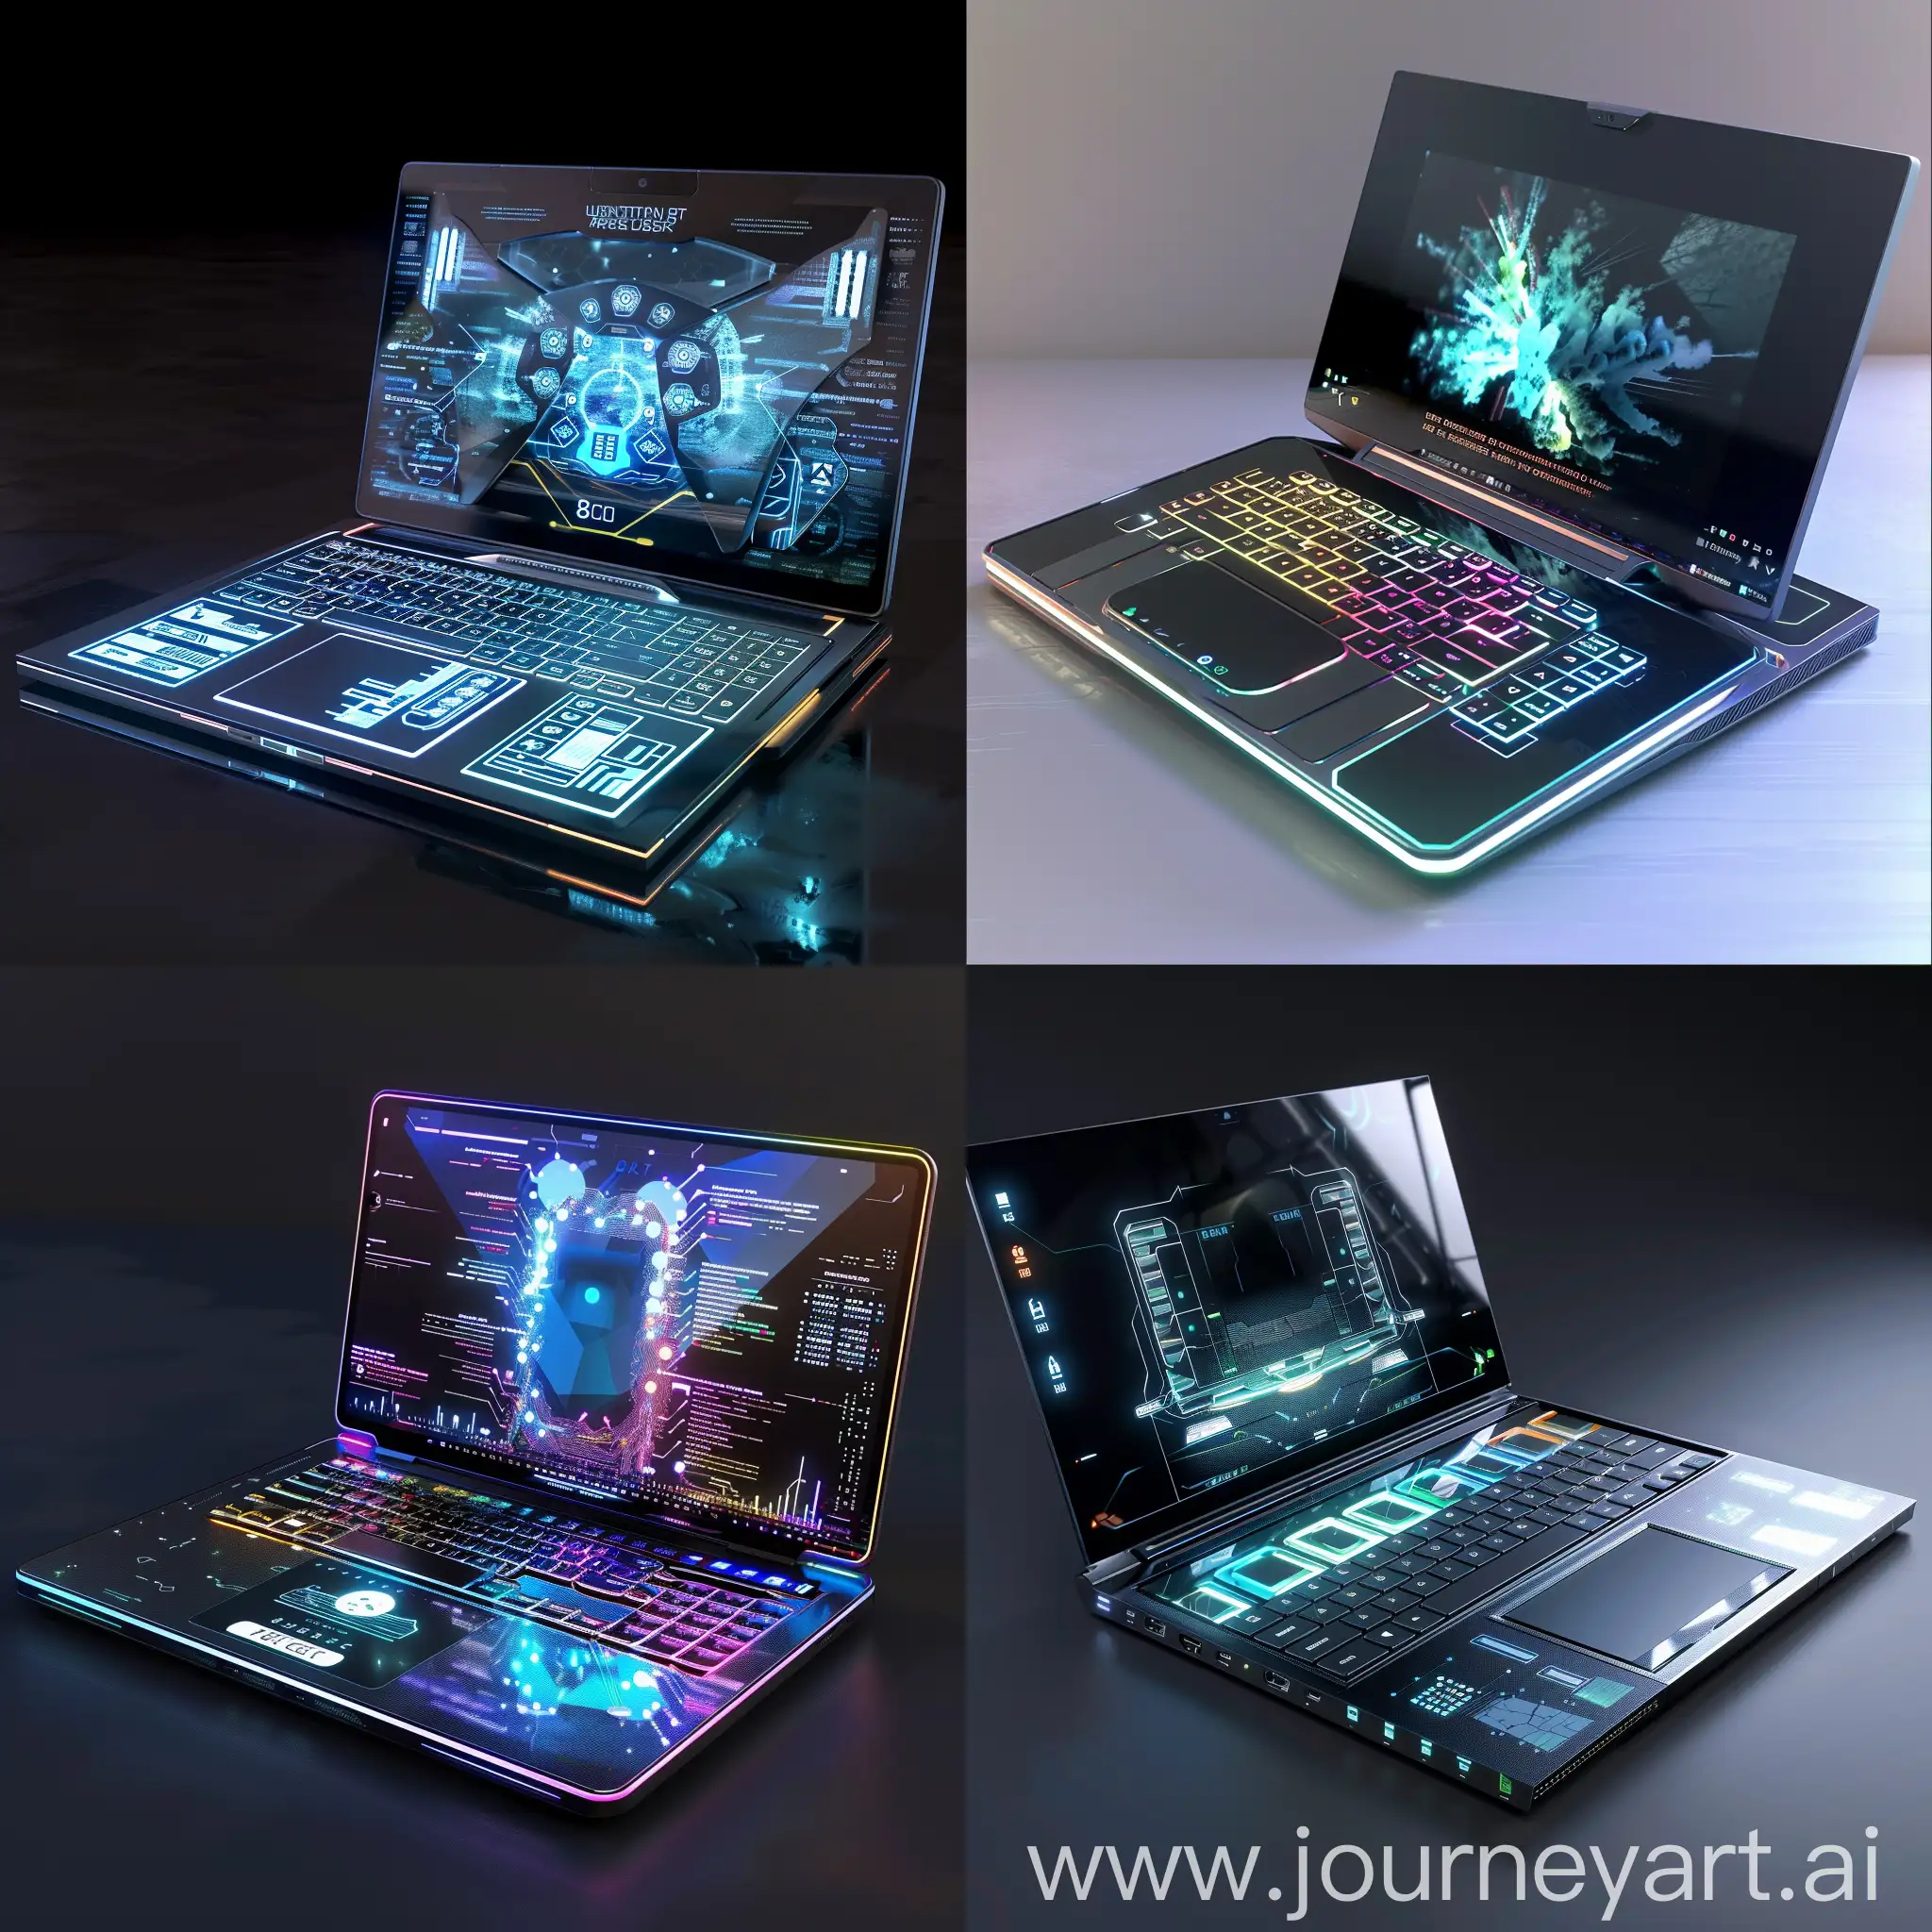 Futuristic-Quantum-Laptop-with-Holographic-Display-and-Advanced-Security-Features